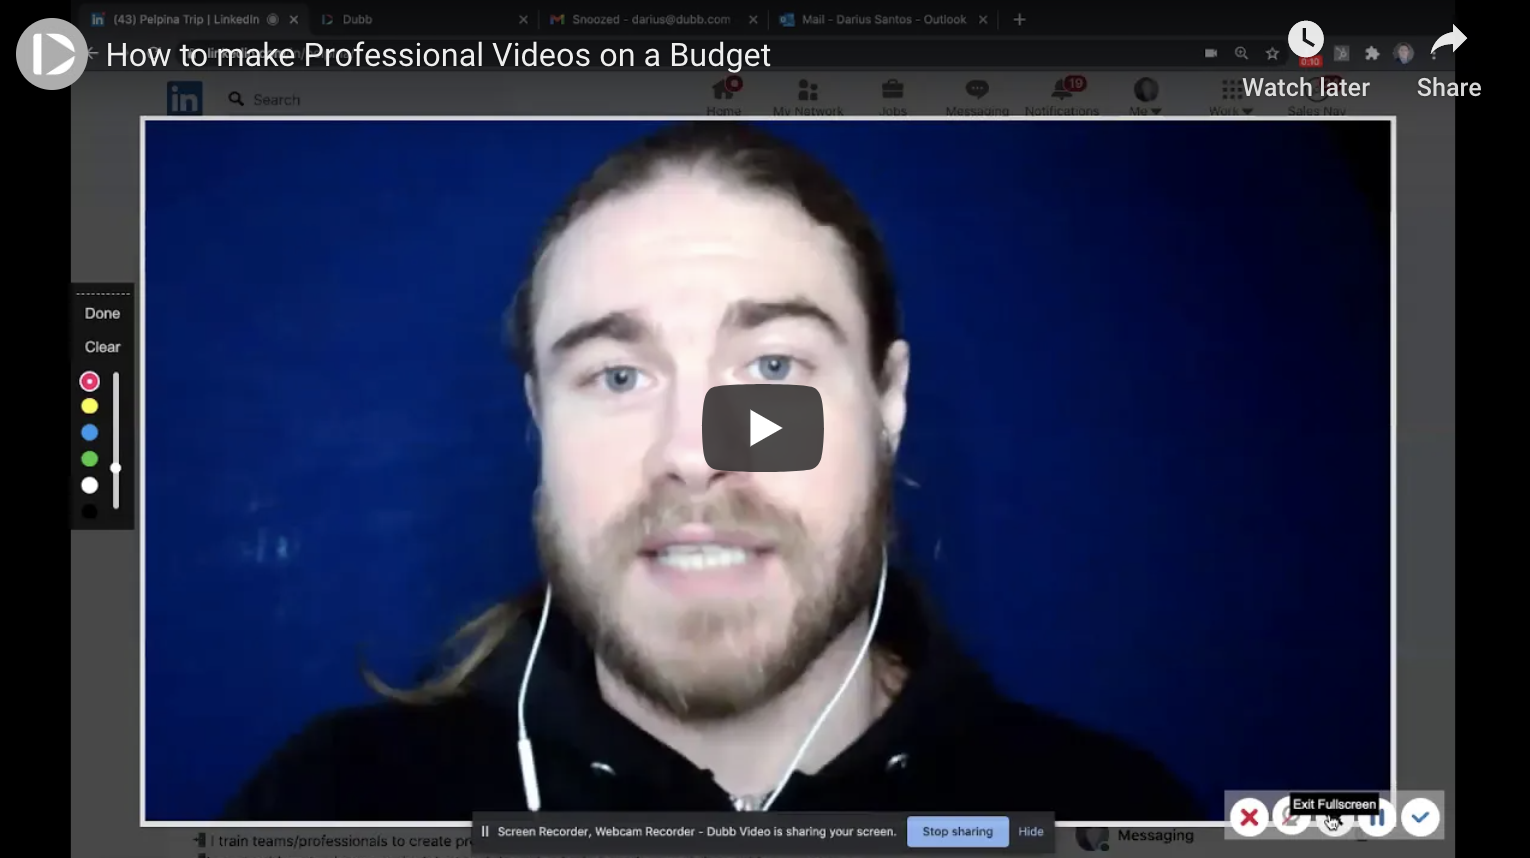 How to Make Professional Videos on a Budget